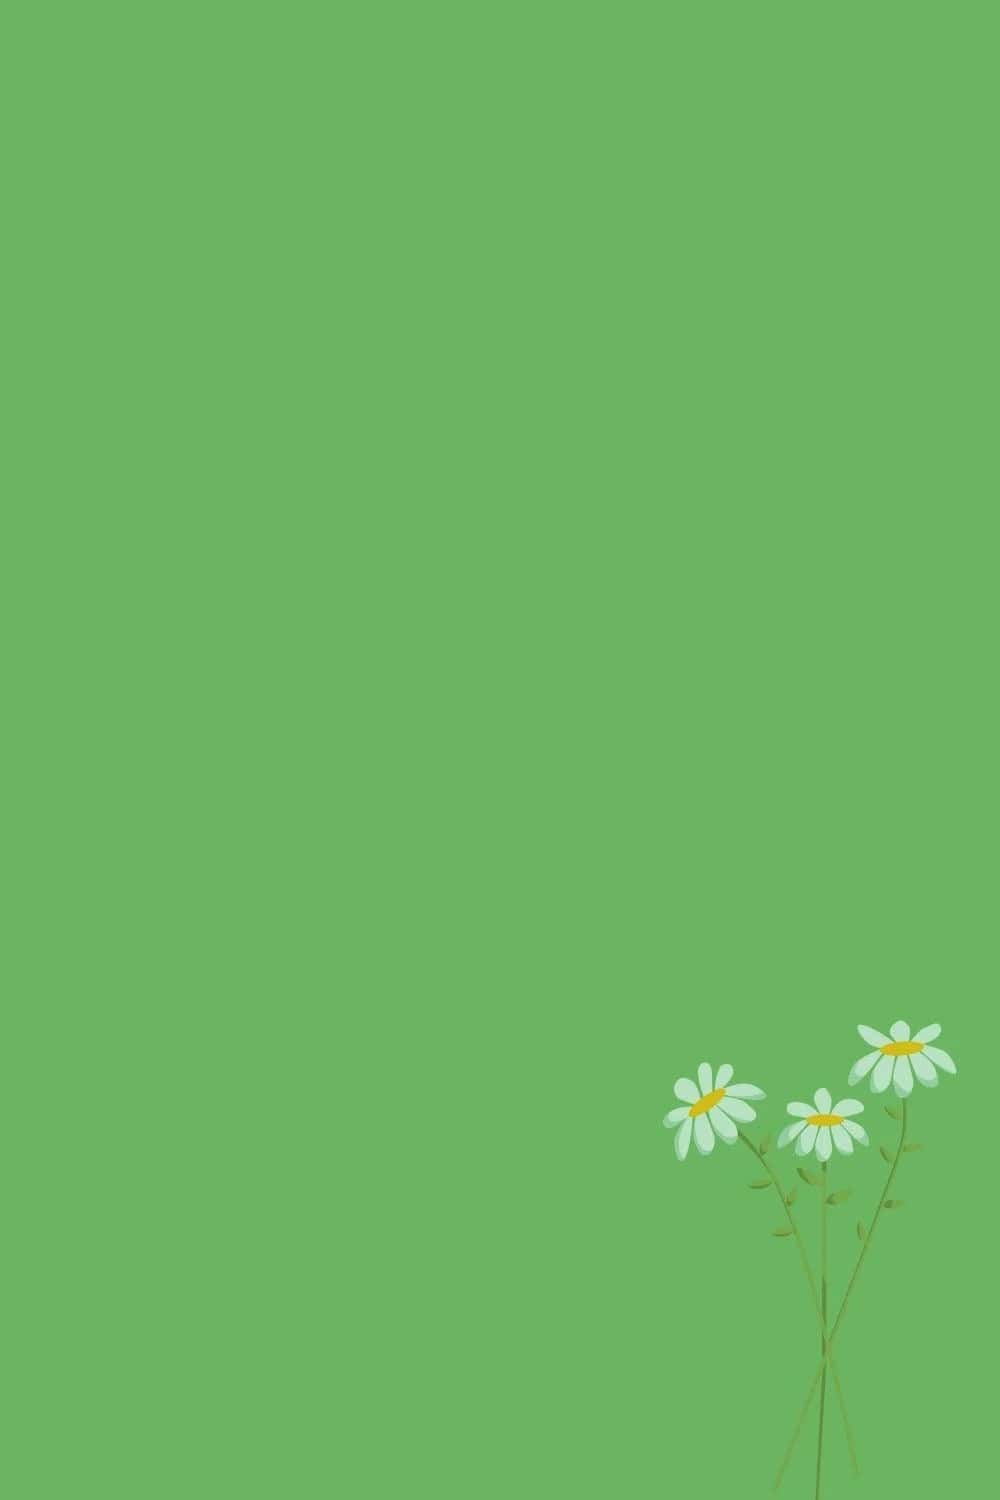 A phone wallpaper with three daisies on the bottom right corner - Sage green